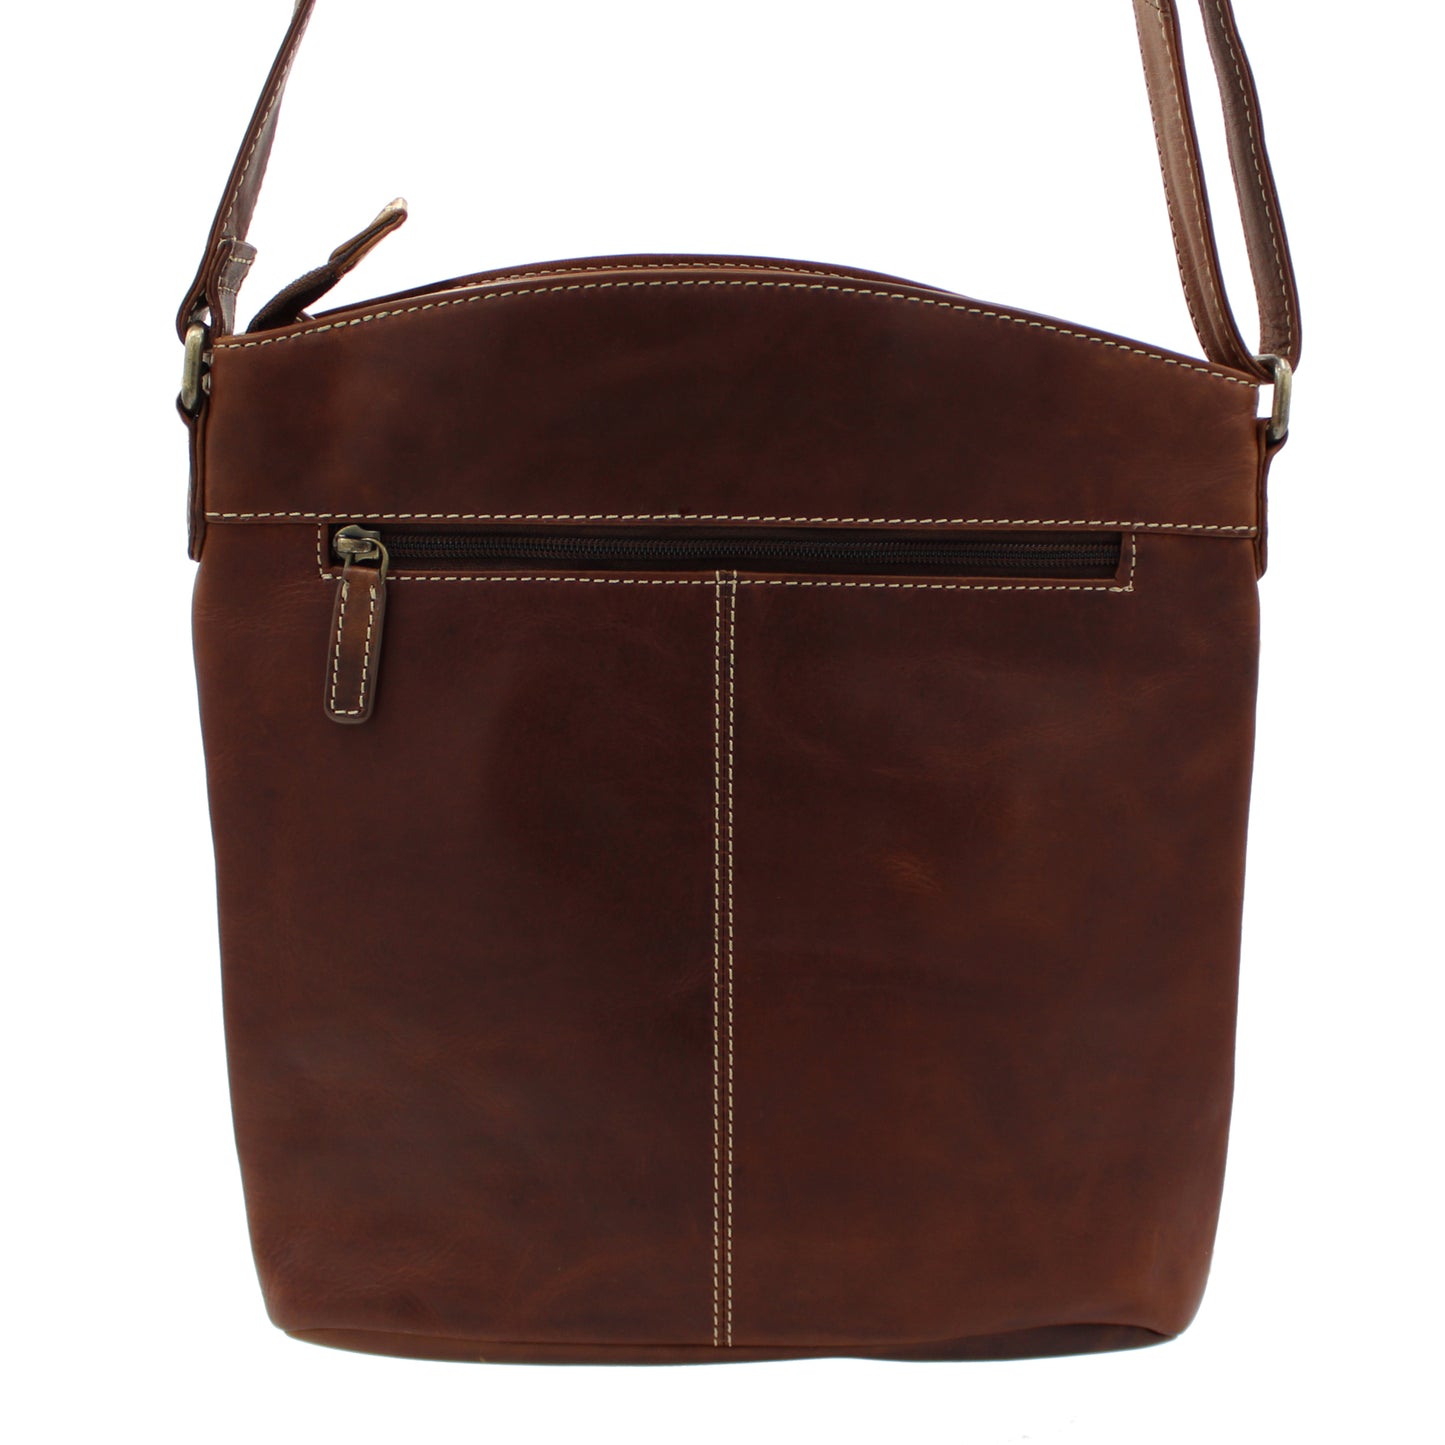 RE Leather Bag (12"x 13"x 3")